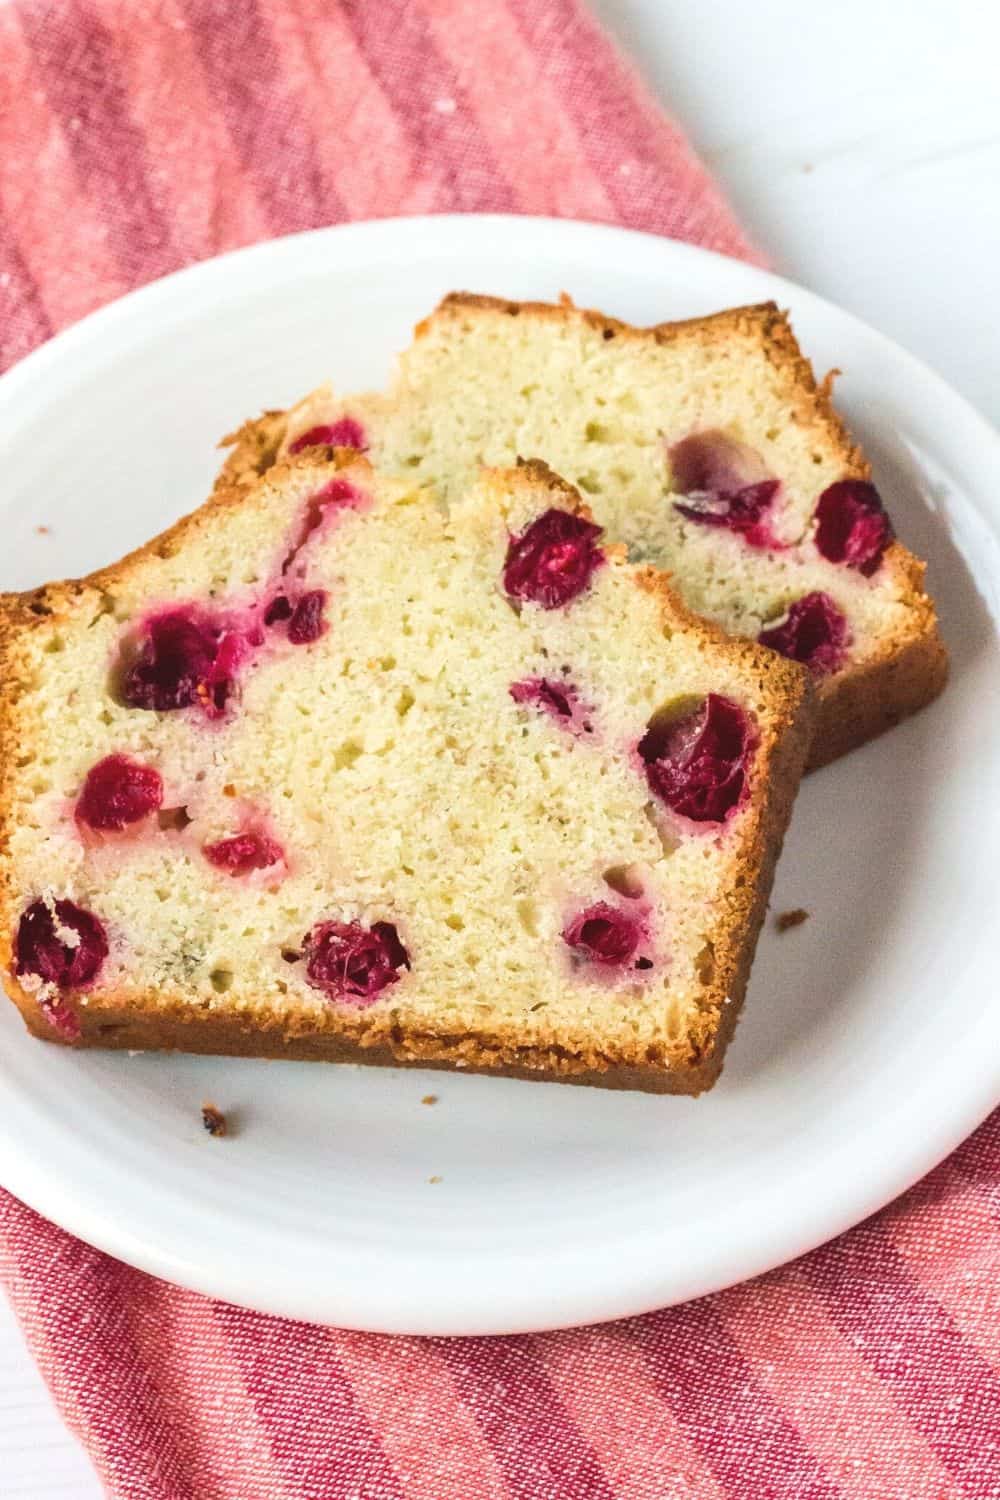 slices of banana bread baked with fresh cranberries in the batter served on a white plate atop a red striped napkin